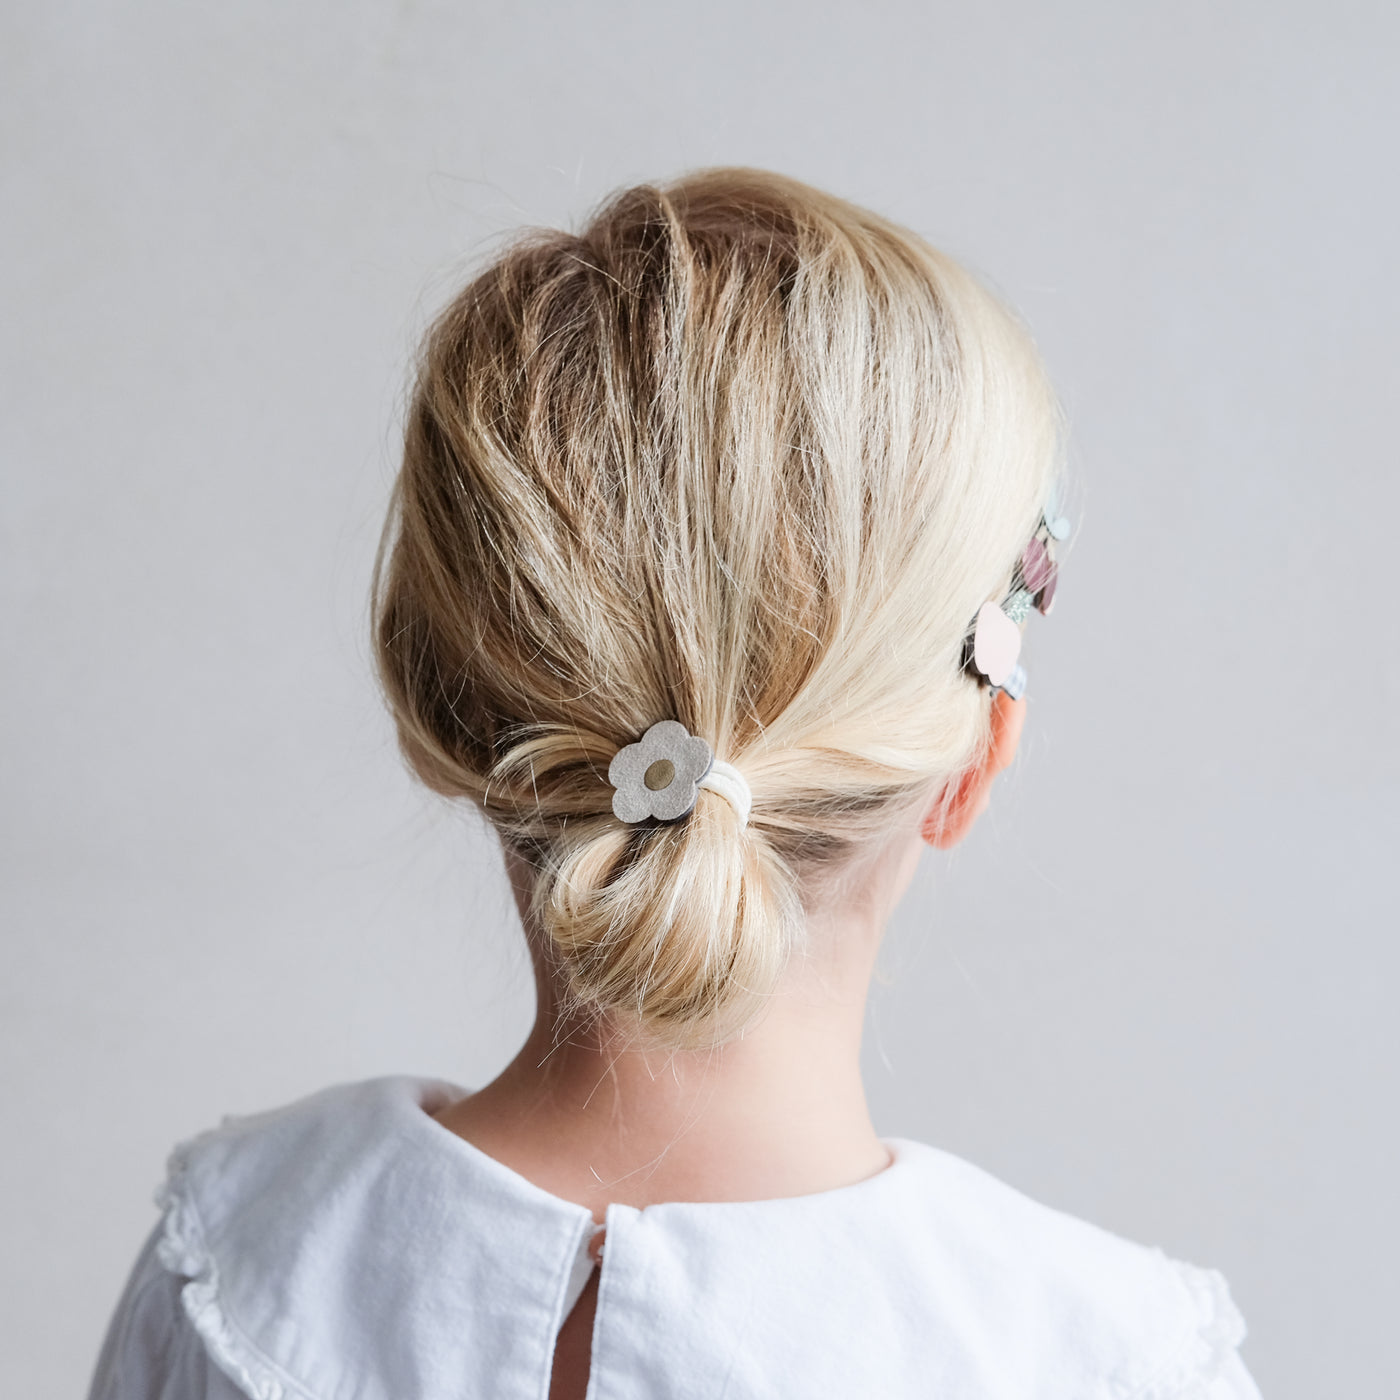 Soft suedette flower pony with metallic gold centre, worn by little girl in a cute low bun hairstyle